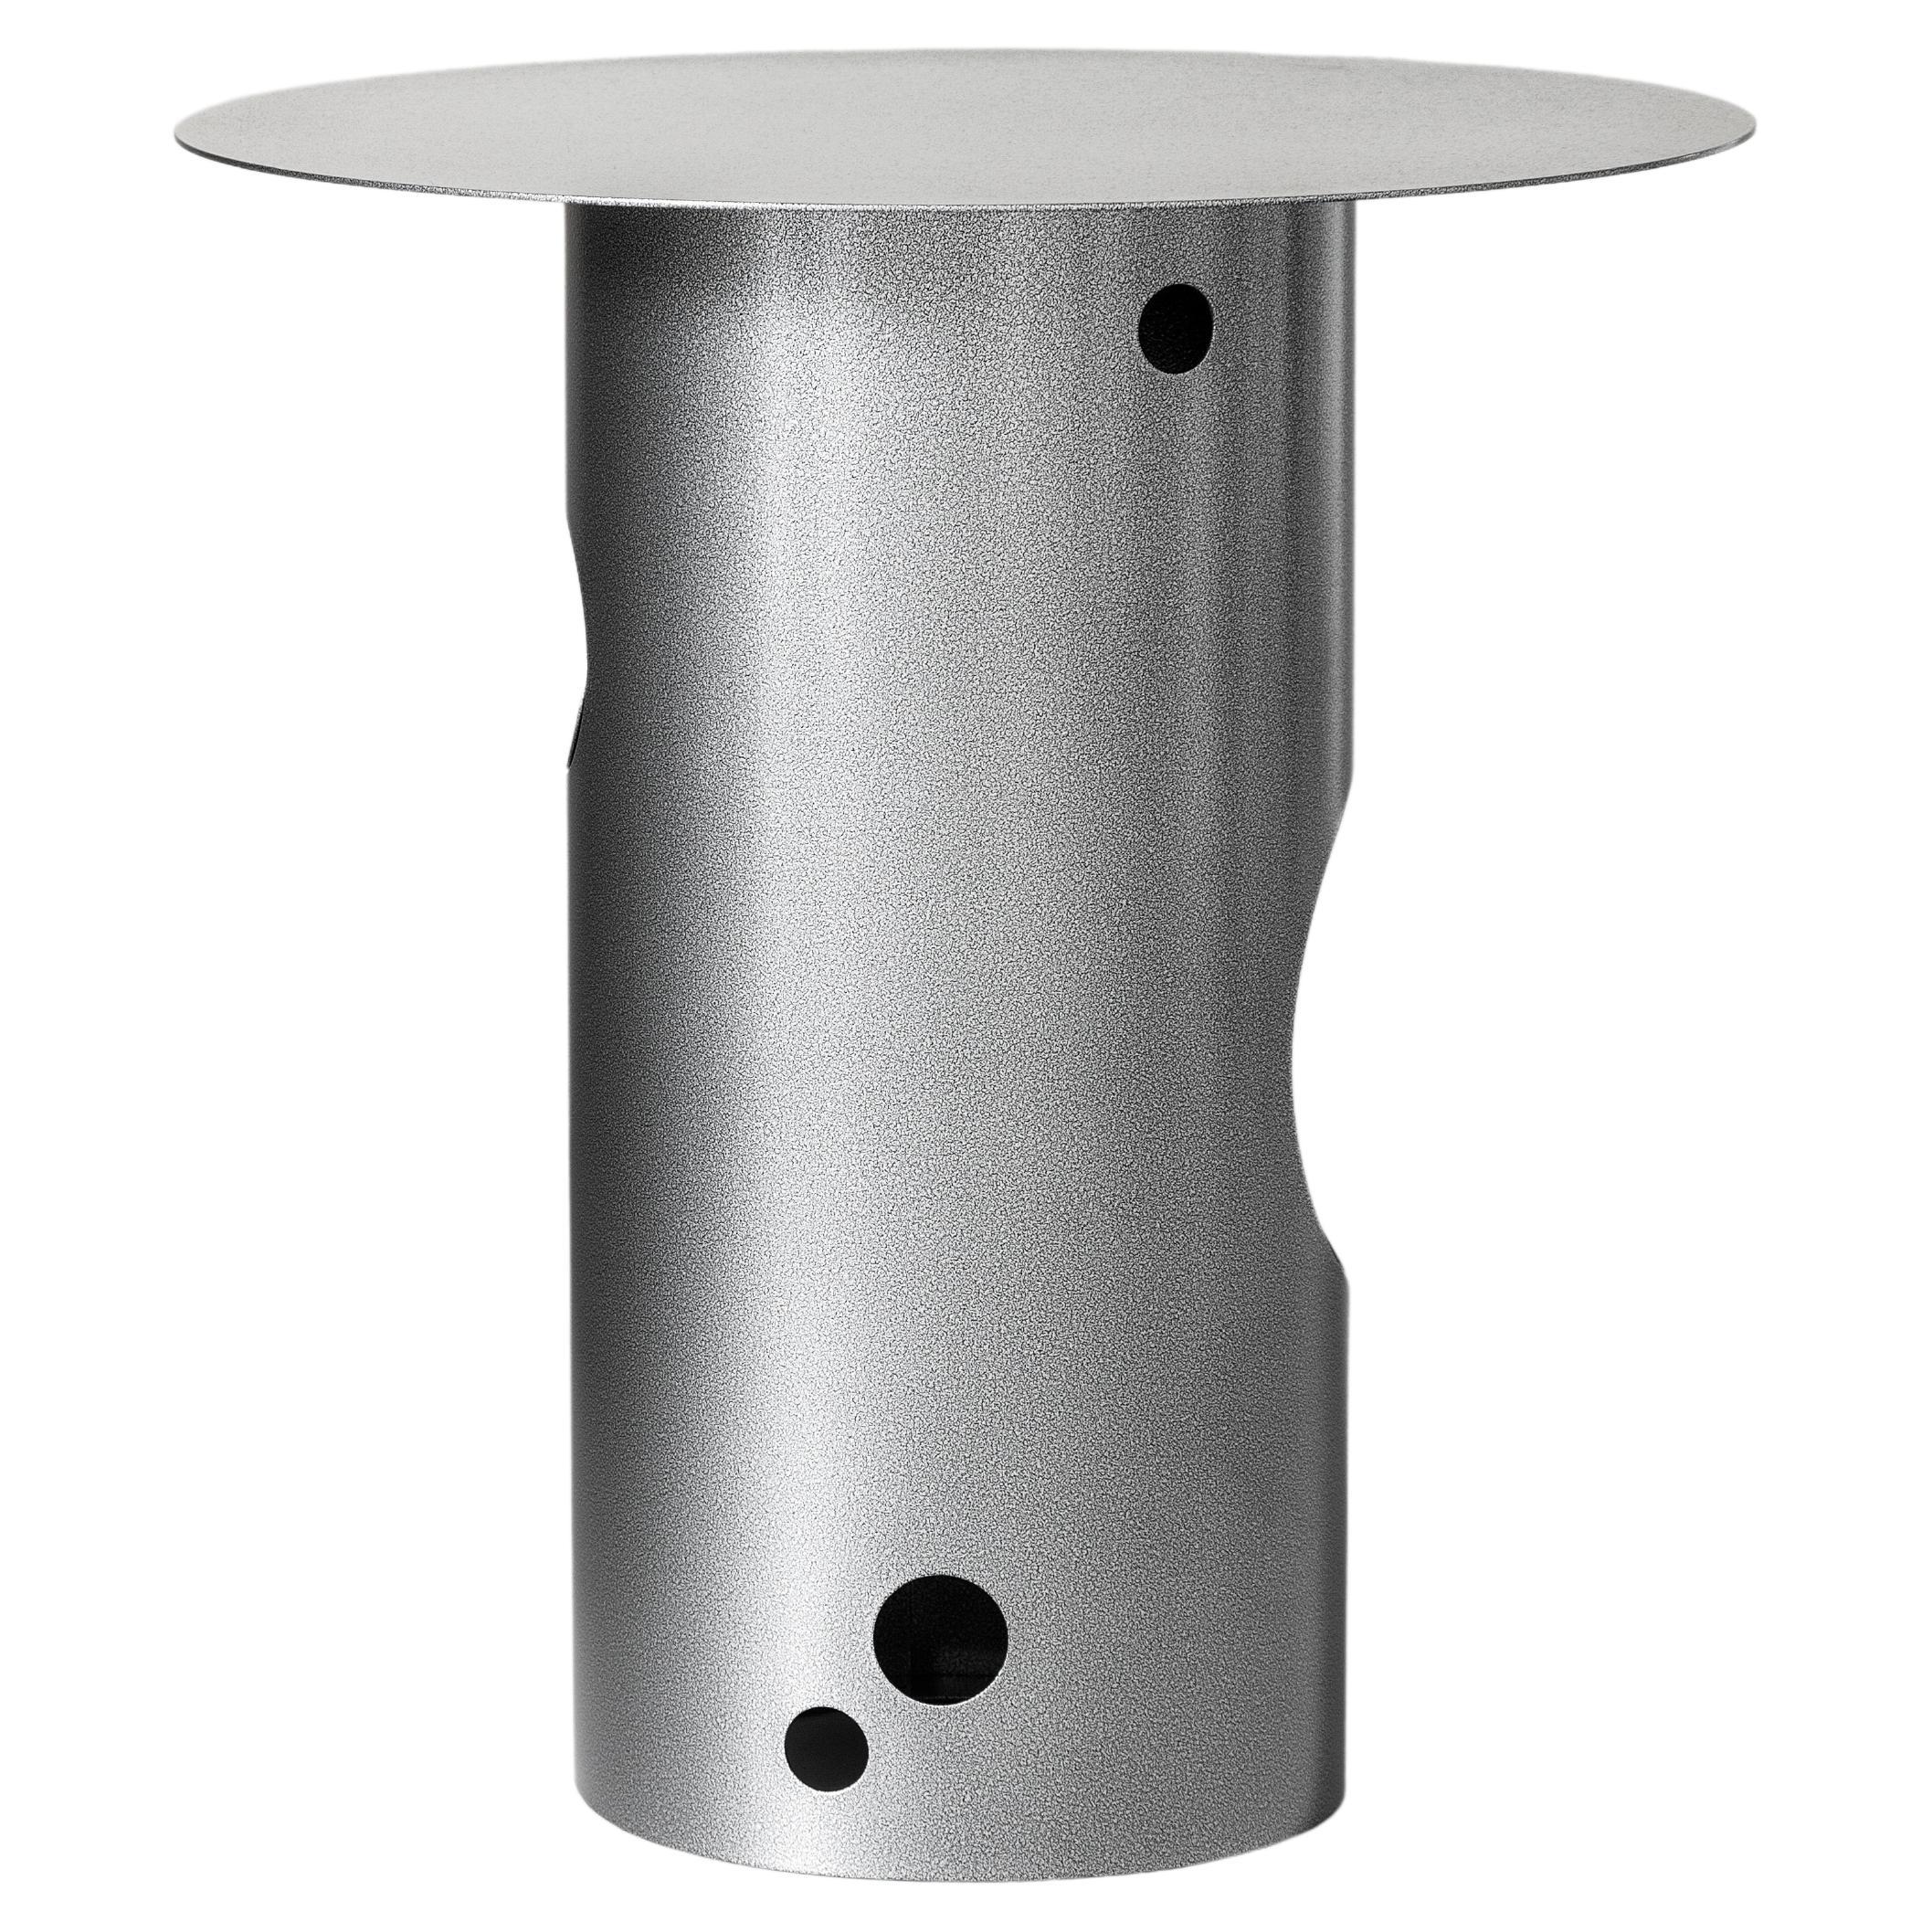 21st Century Contemporary Italian Silos Dining Table by Spinzi, Arabesque Grey For Sale